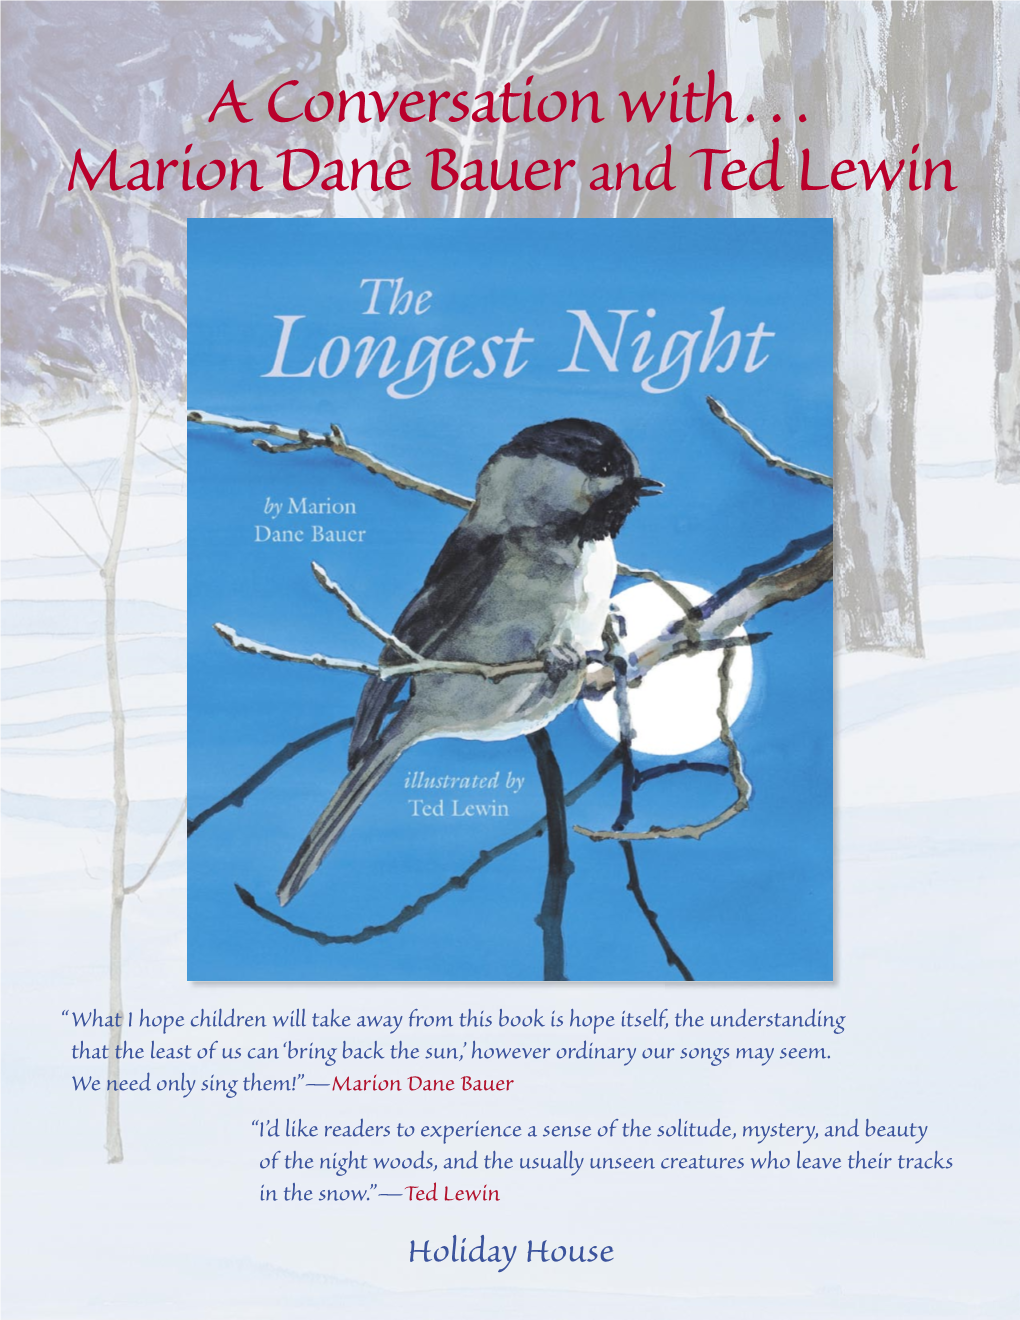 A Conversation With… Marion Dane Bauer Andted Lewin